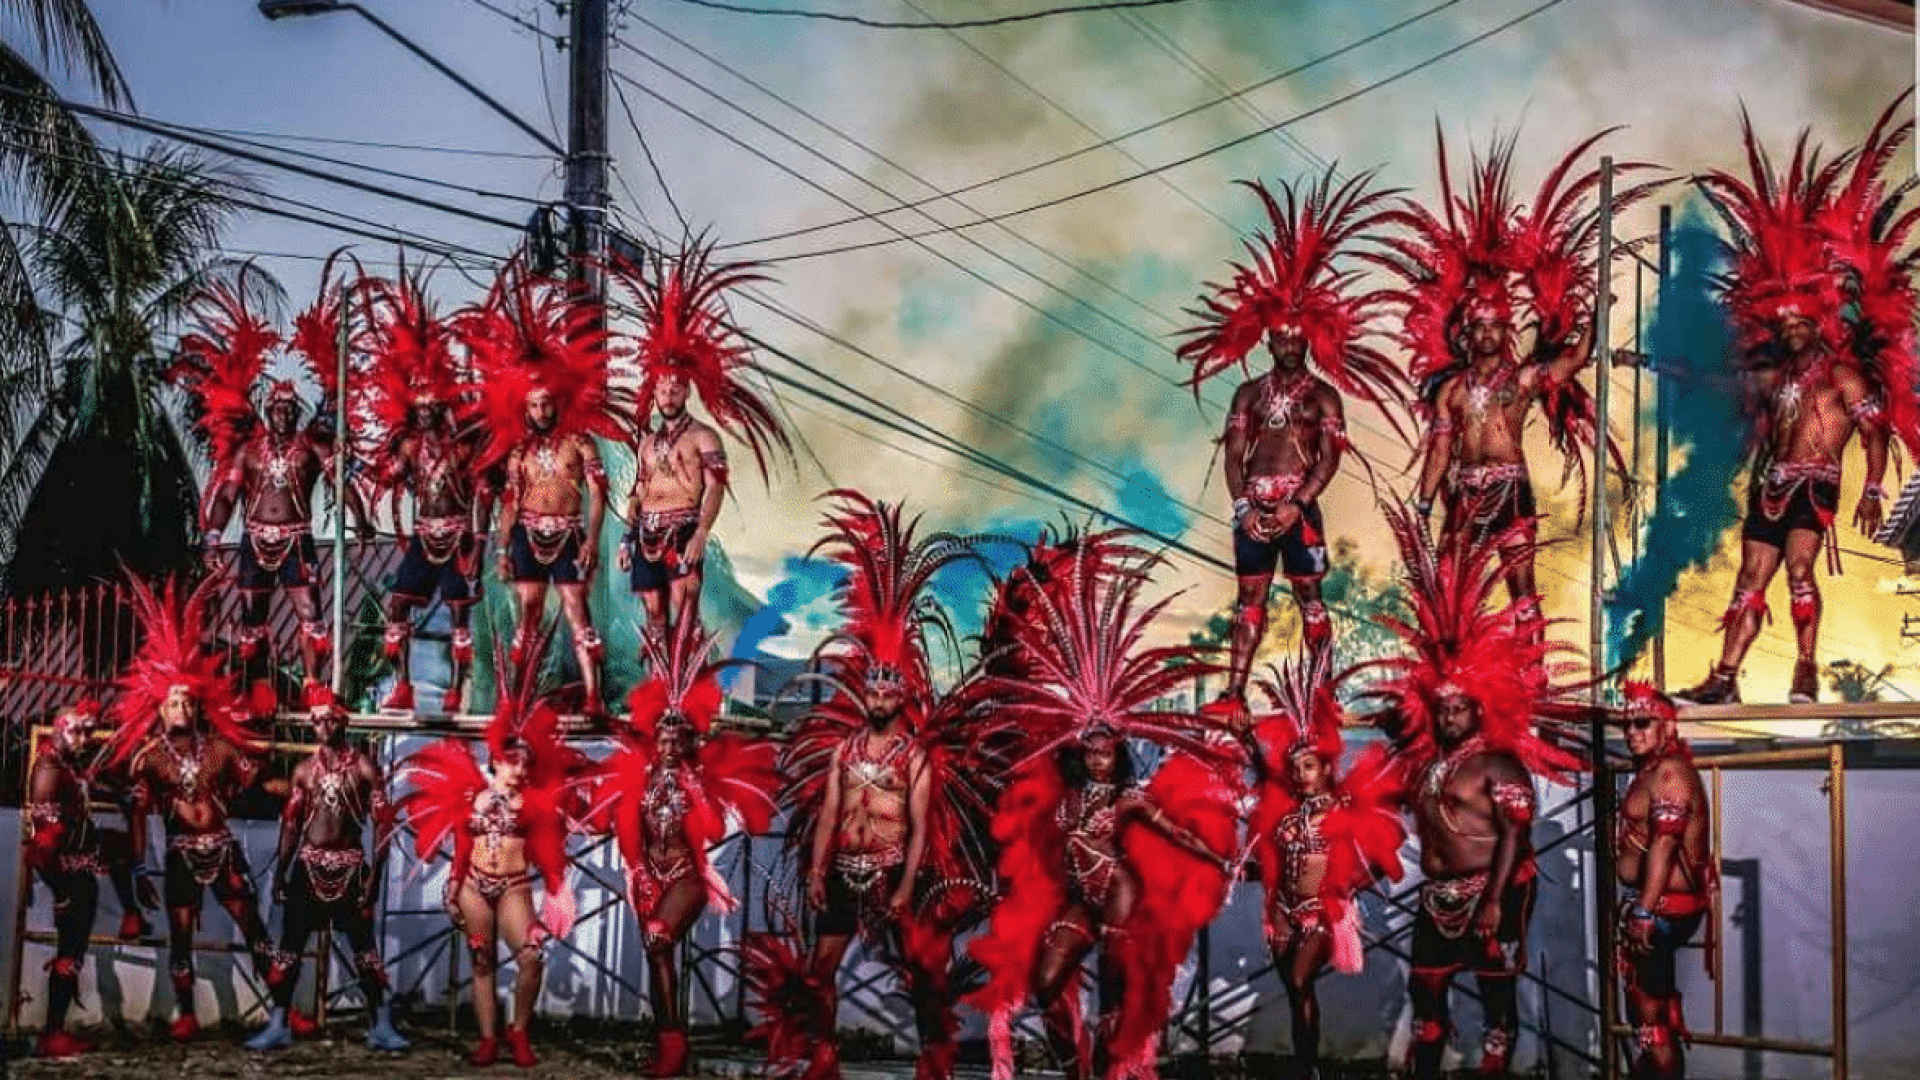 Welcome to Soca Kingdom! A First Timer's Guide to Trinidad Carnival